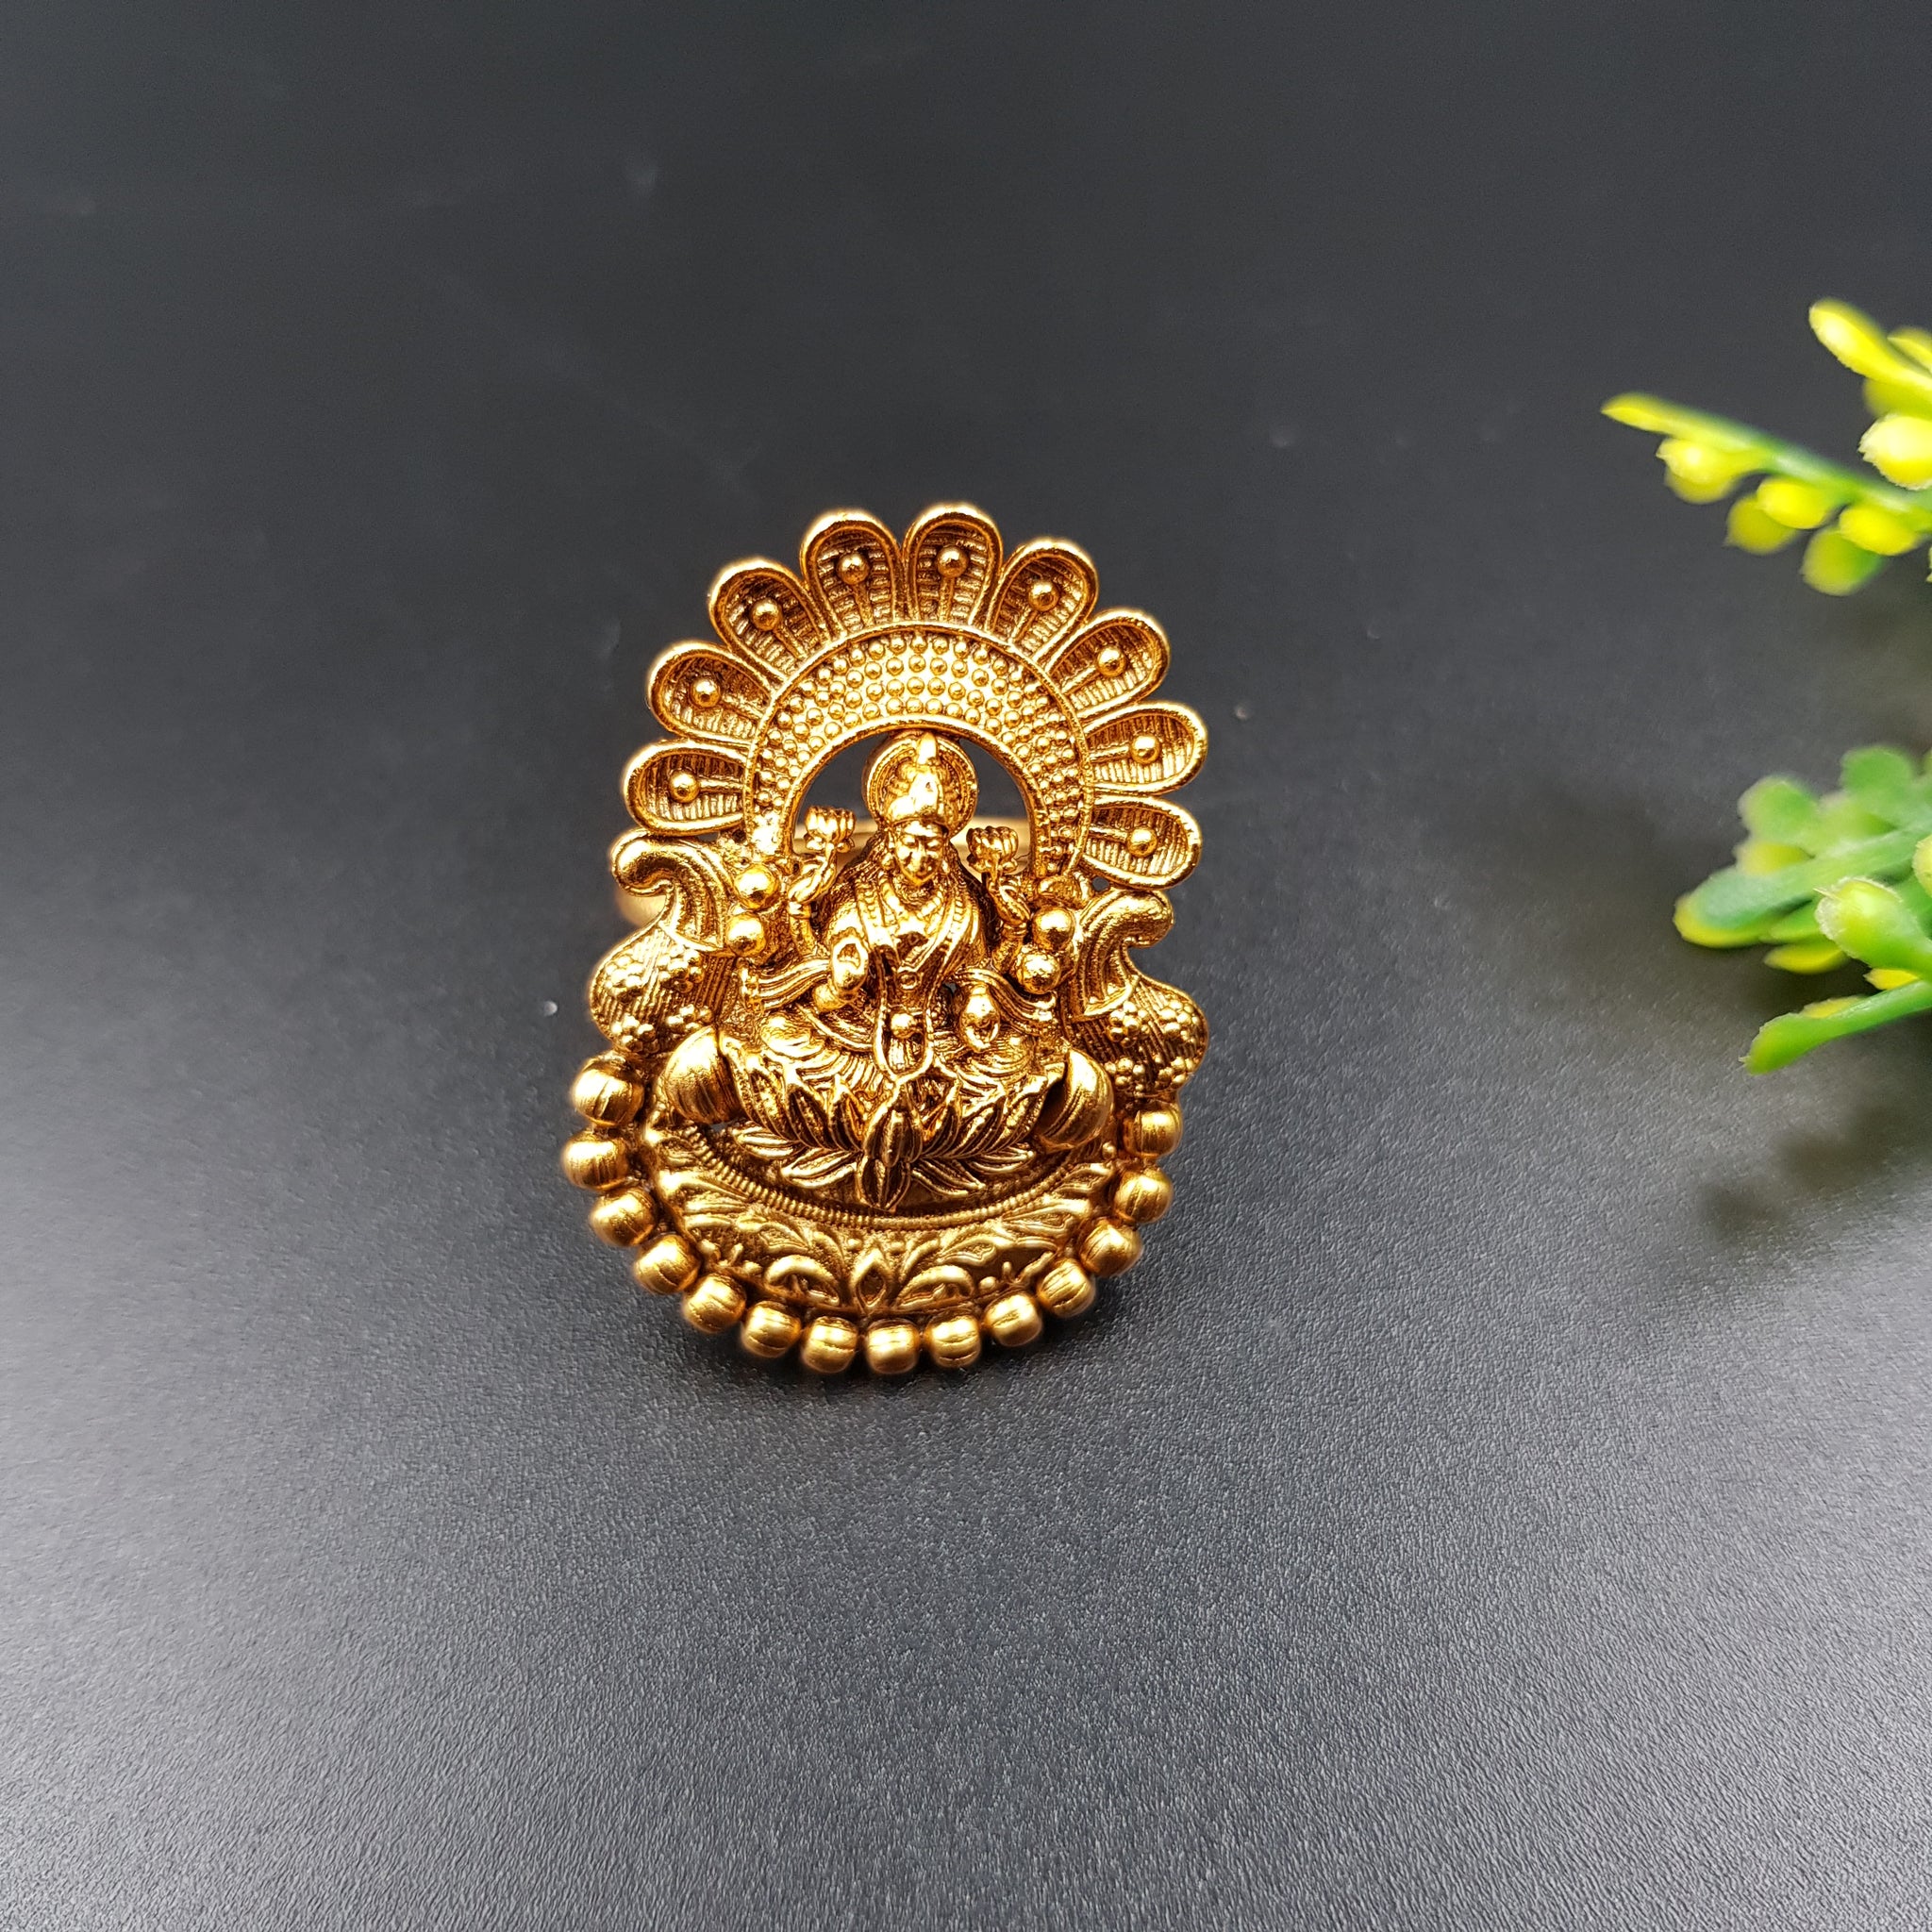 Vintage Antique Tribal Old 20k Gold Ring Handmade Jewelry Rajasthan India -  Etsy Norway